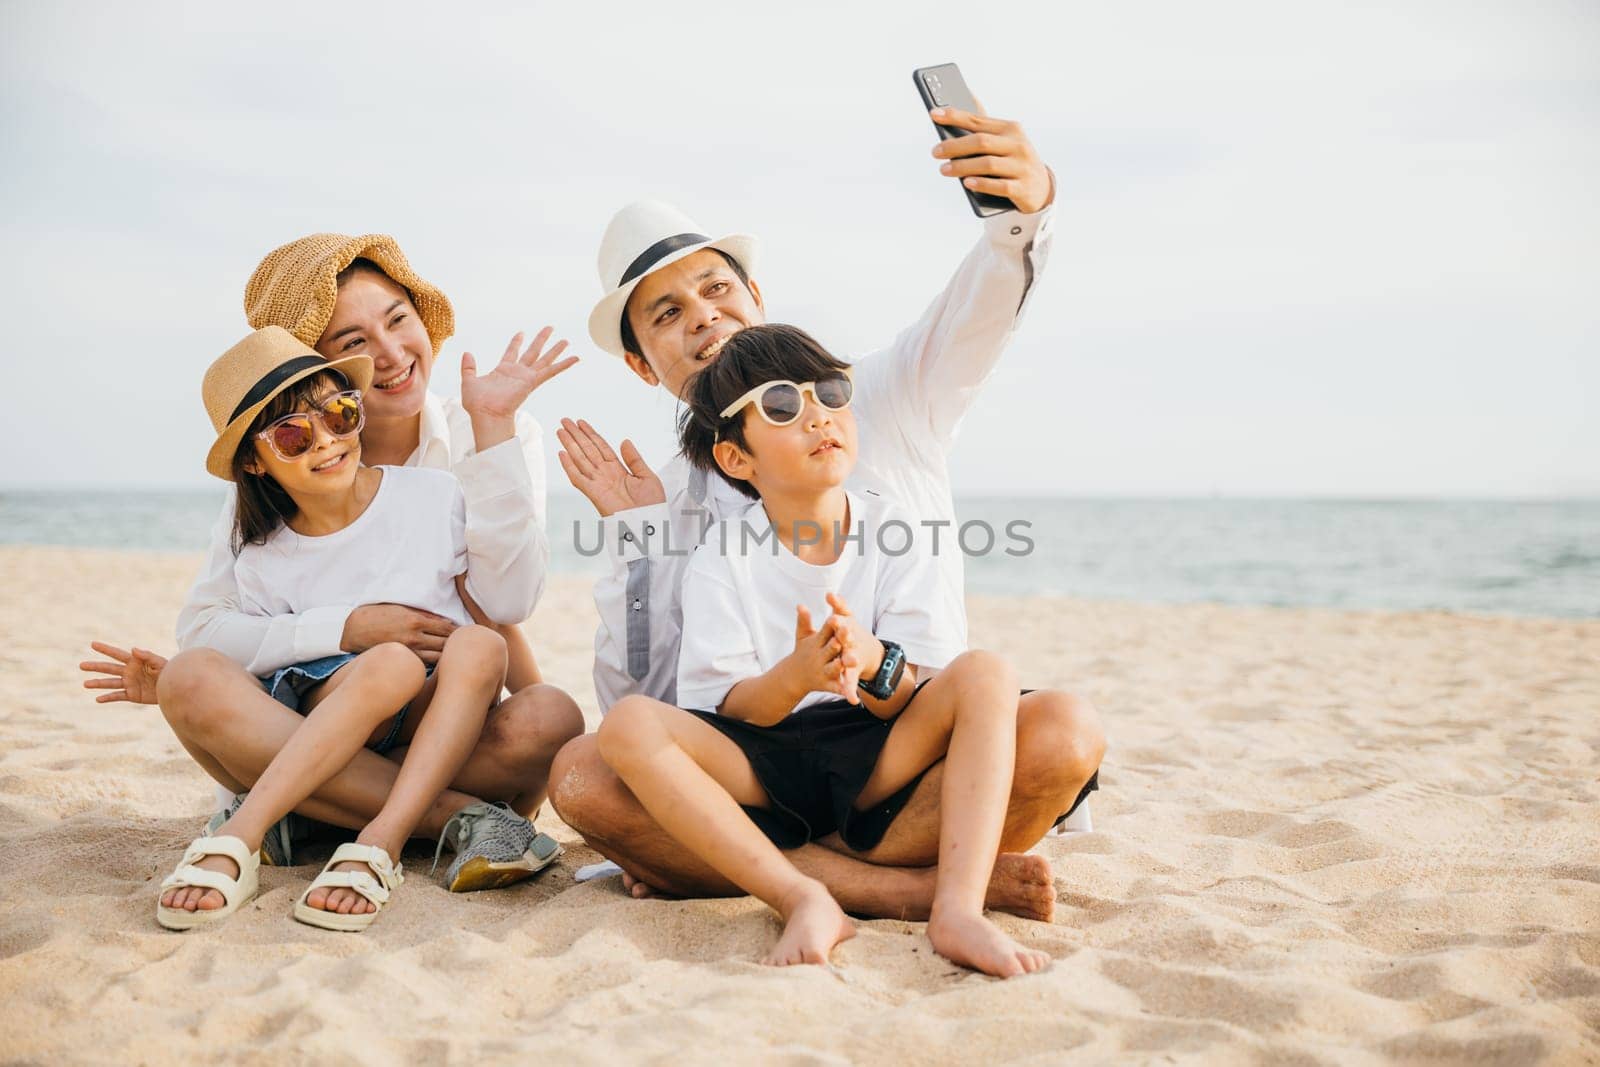 Creating memories at the beach a family shares laughter and joy while taking a playful selfie near the sea. The warmth of family bonds and the freedom of summer travel shine in this portrait.